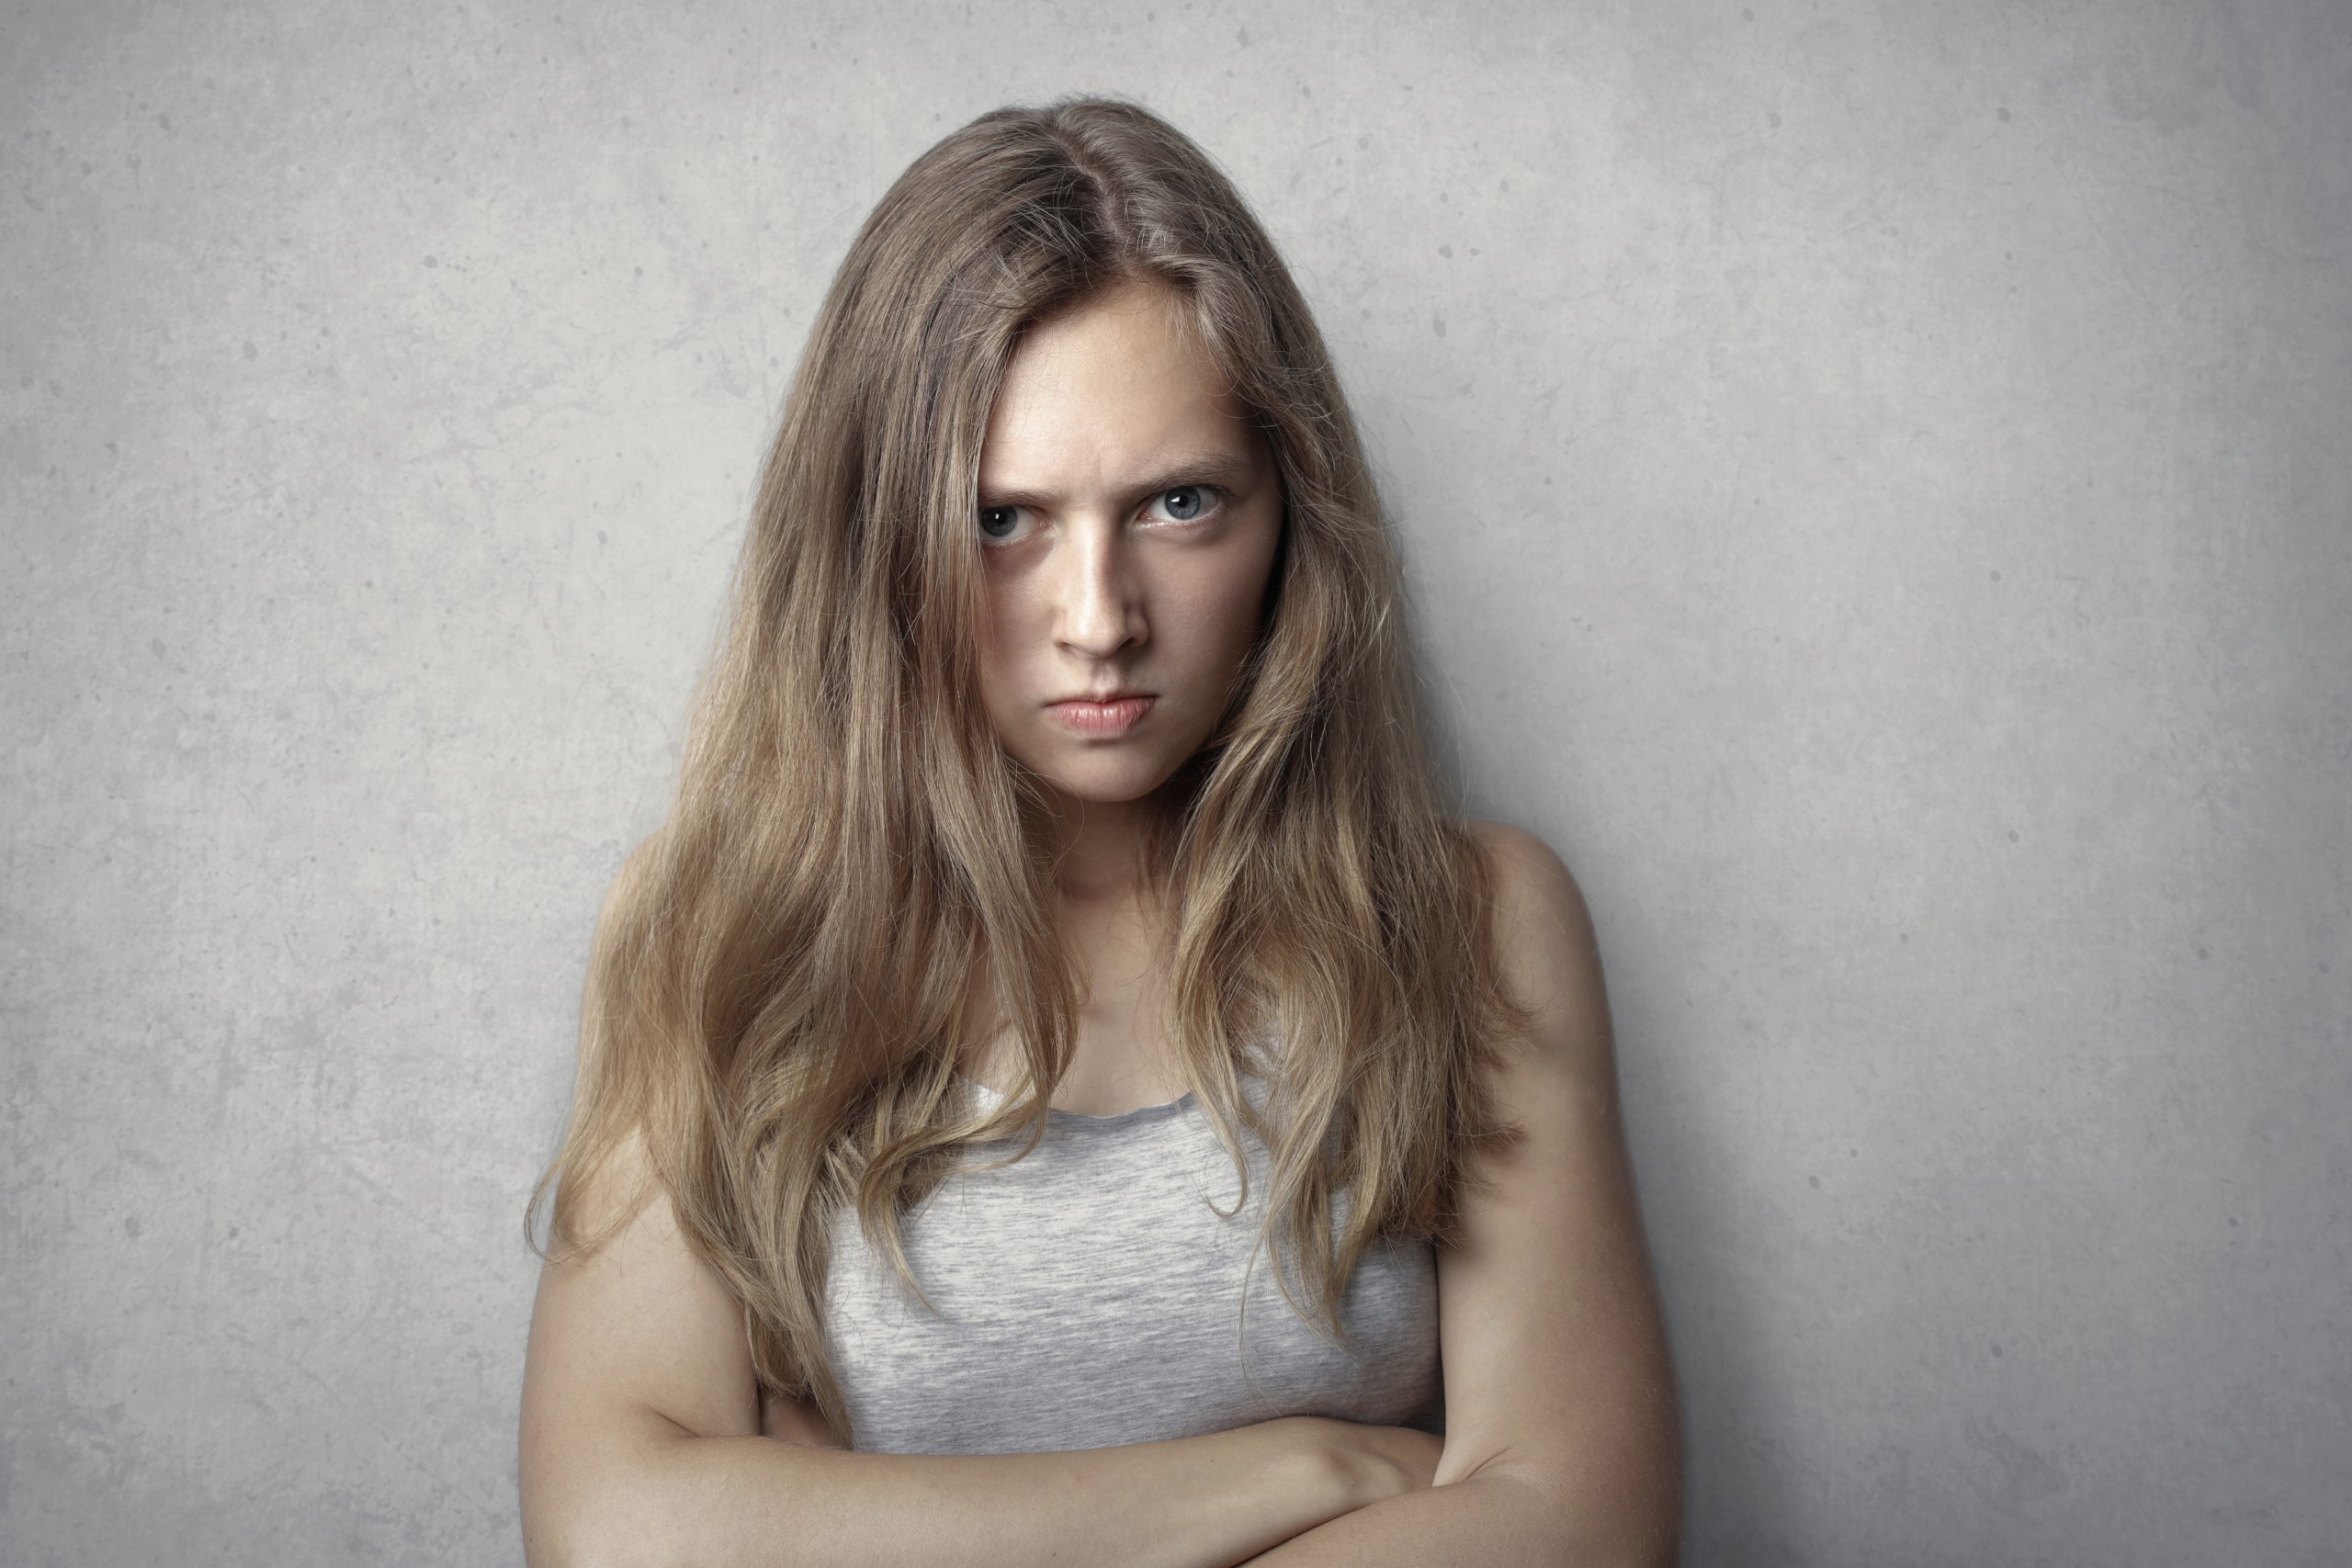 Angry woman with blonde hair and a gray tank top arms folded